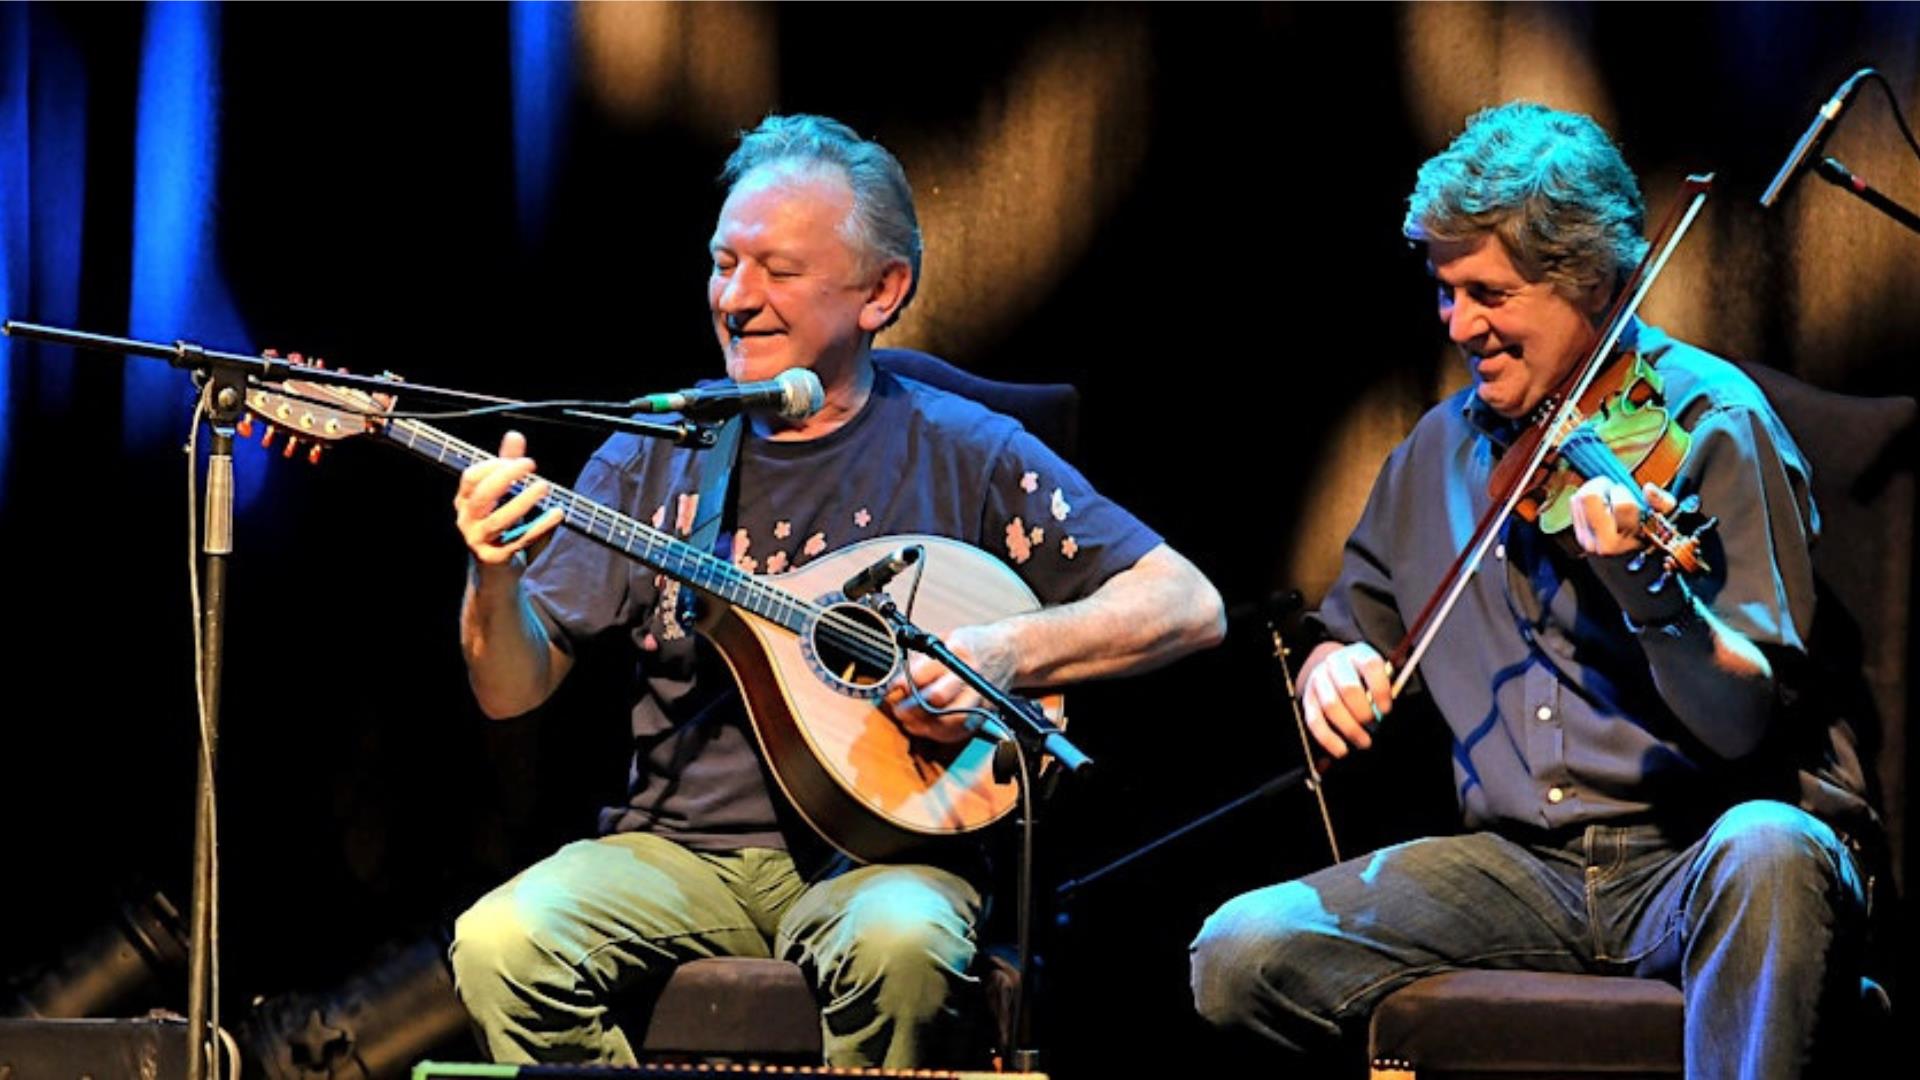 Donal Lunny & Patrick Glackin performing